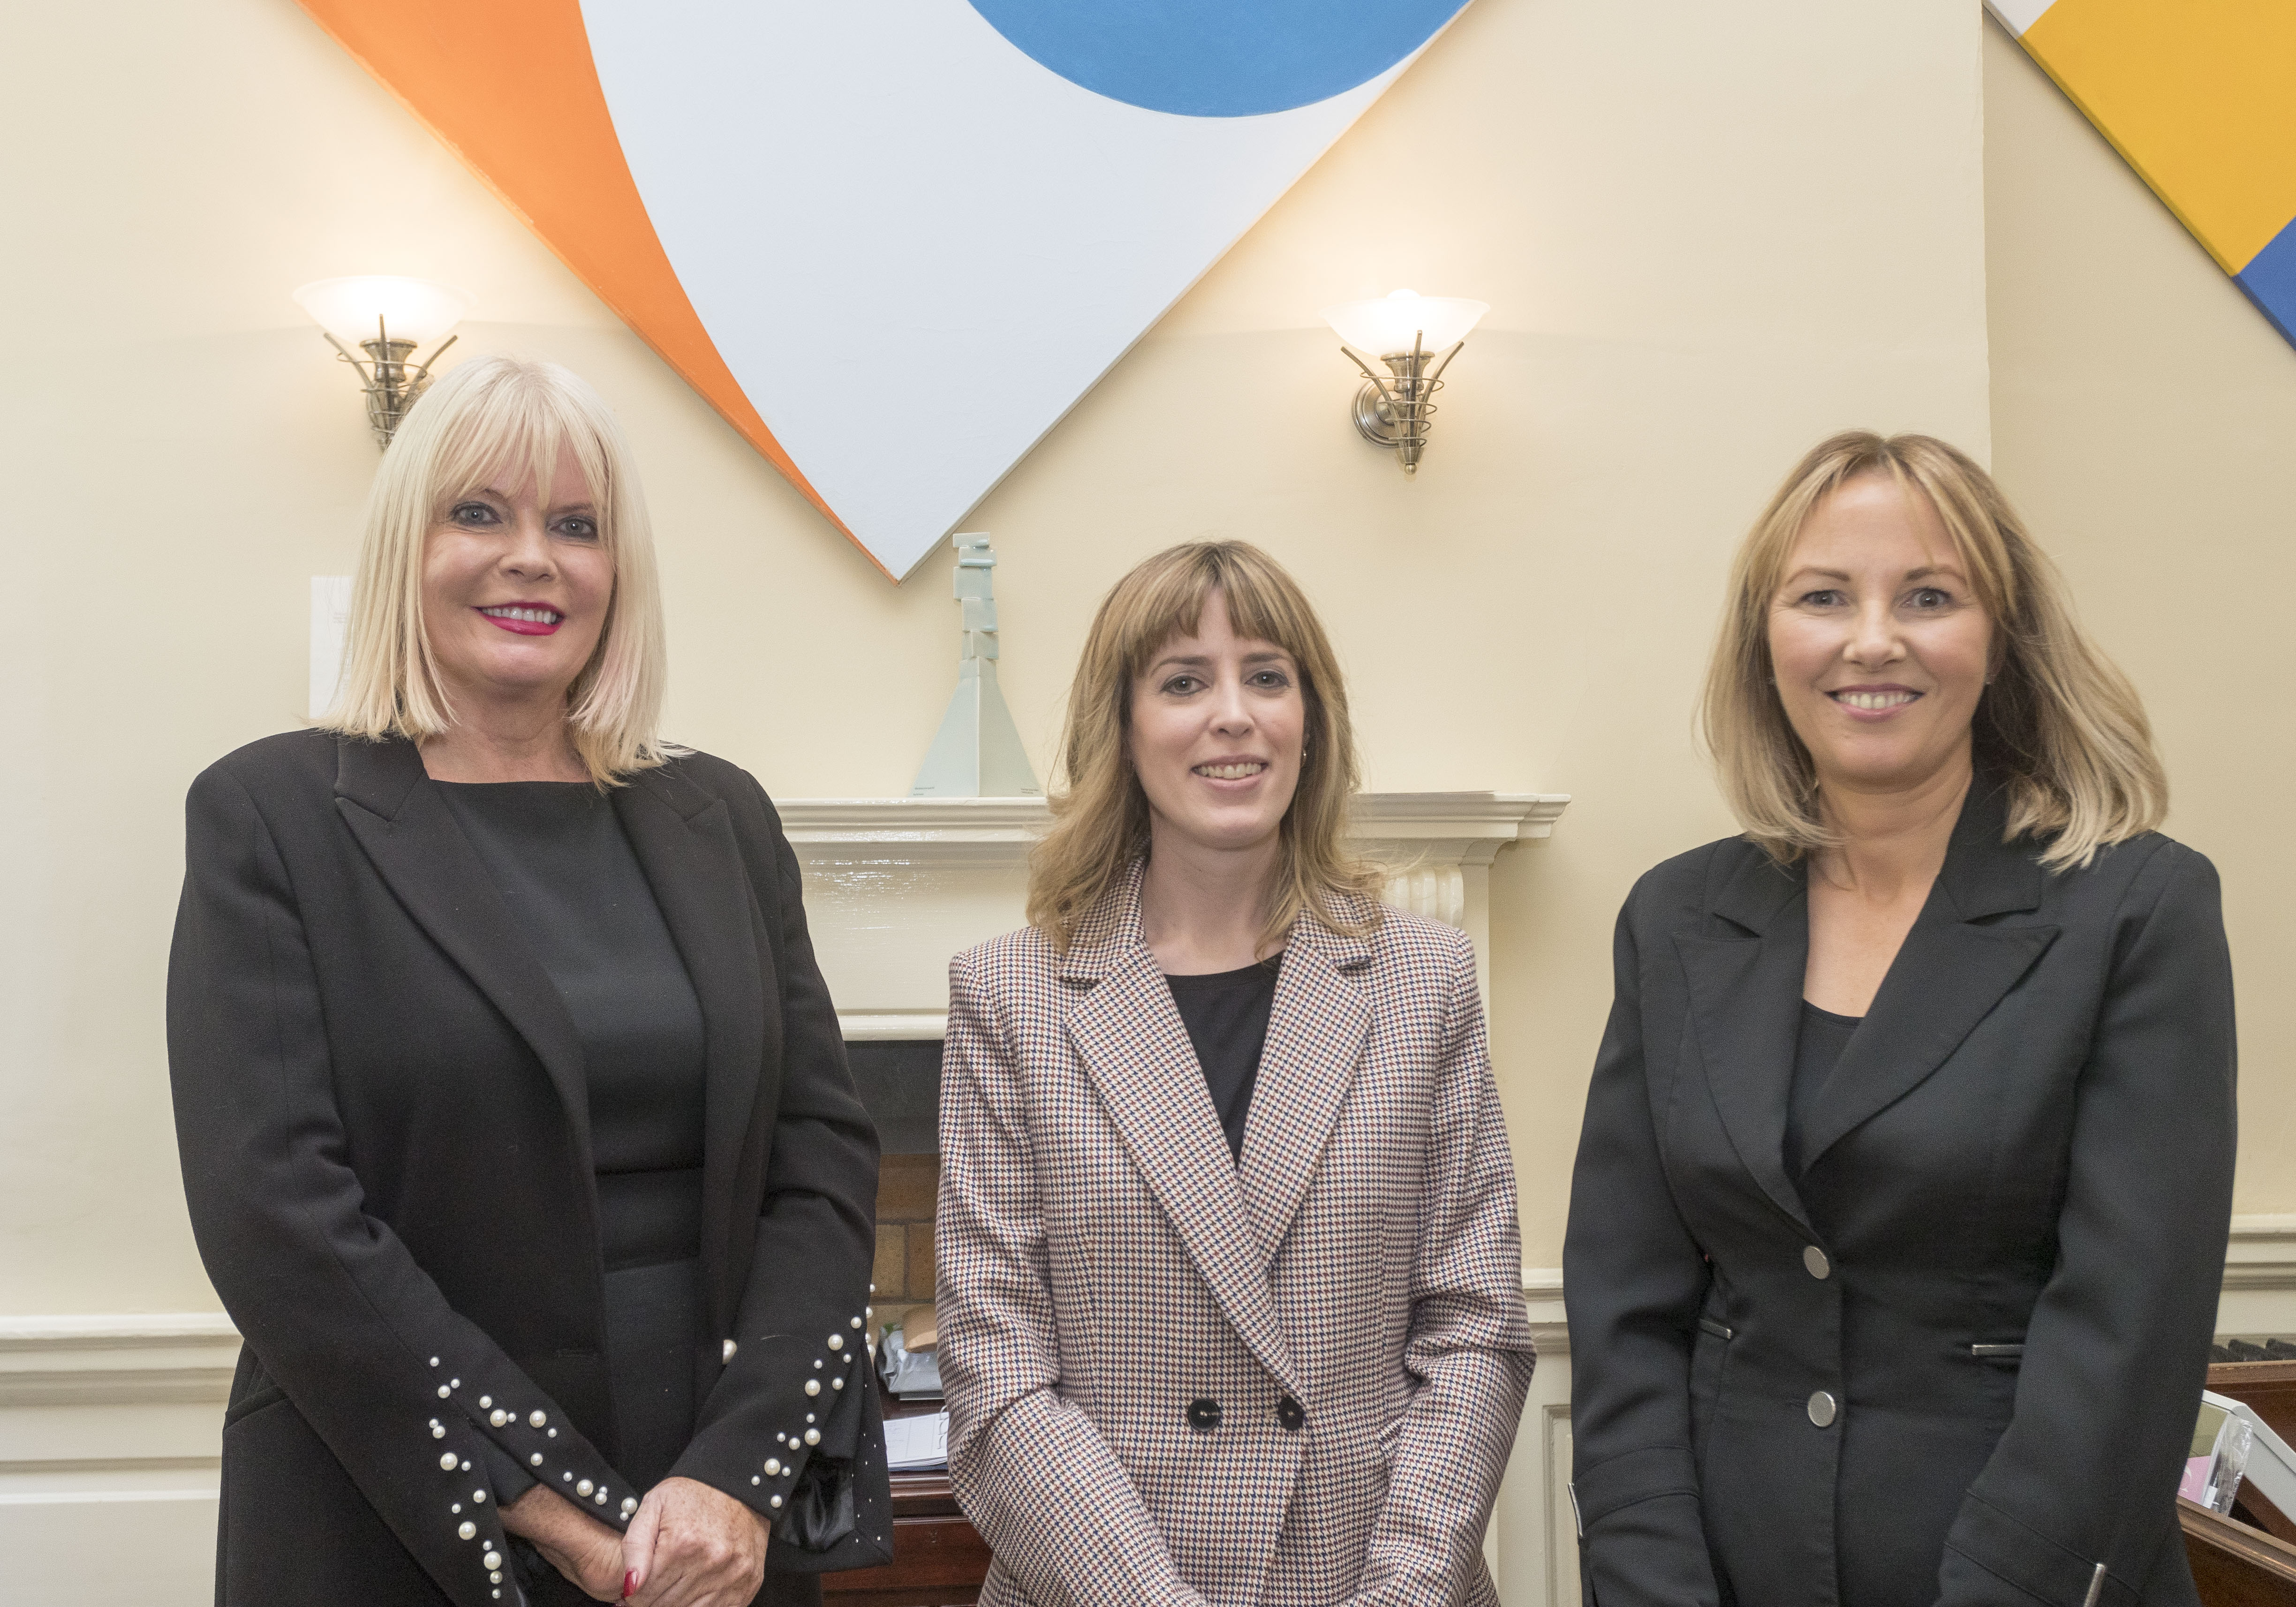 Minister Mary Mitchell O'Connor, Dr Eavan O'Brien and Professor Judith Harford